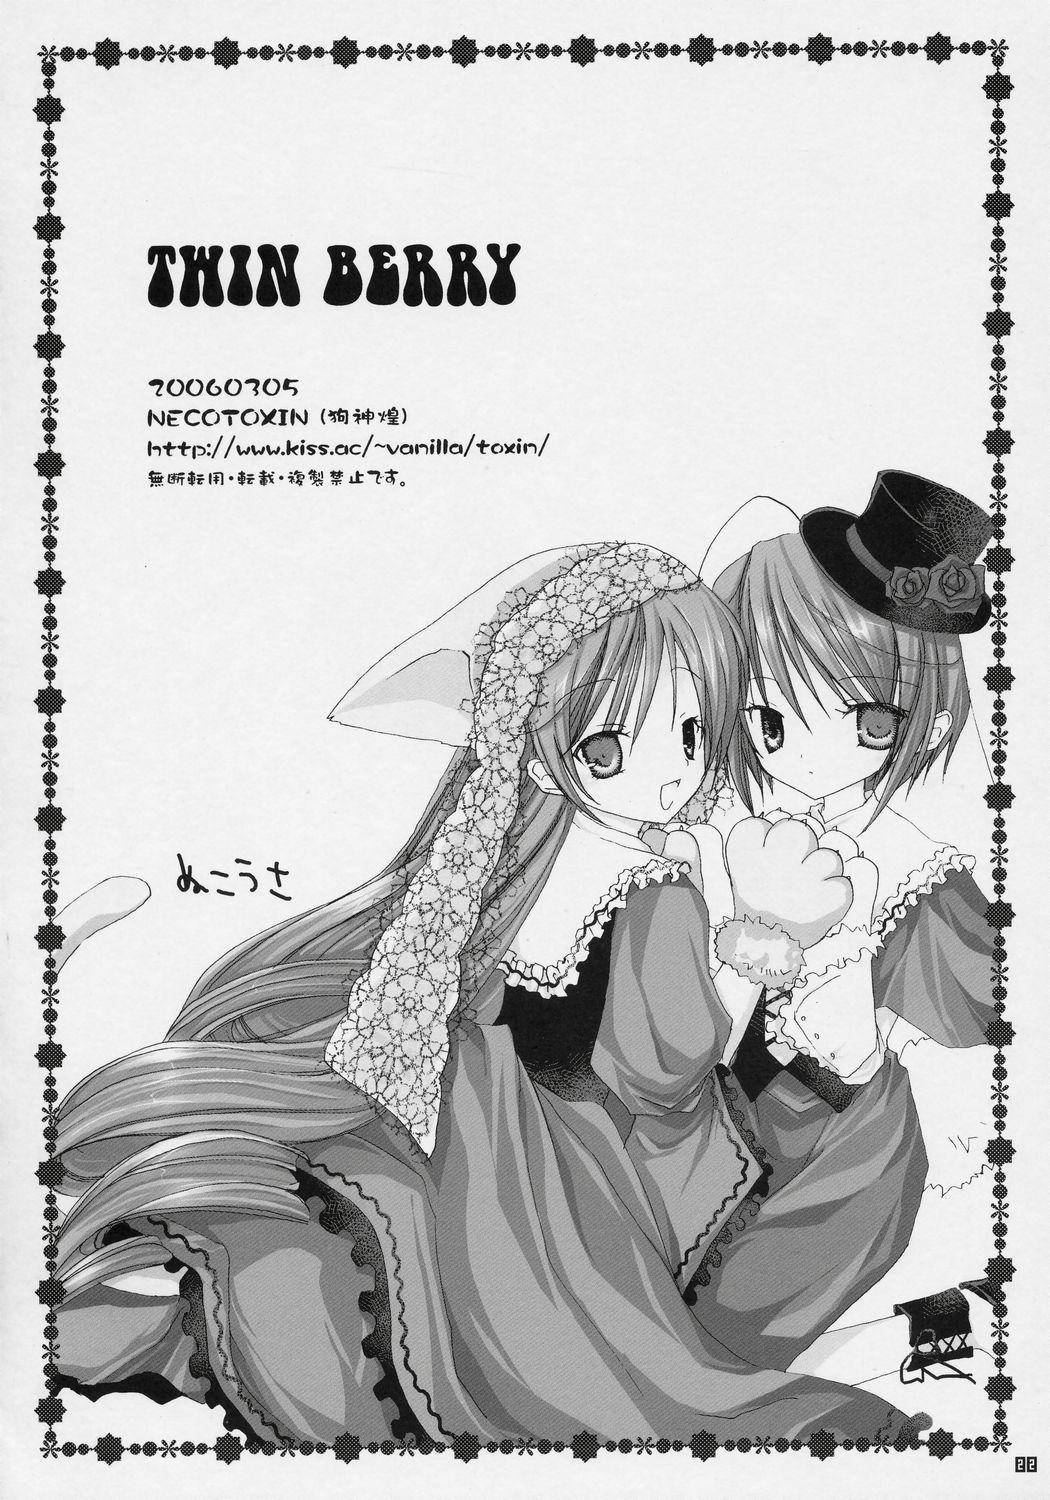 Monster Dick TwinBerry - Rozen maiden Cumload - Page 21